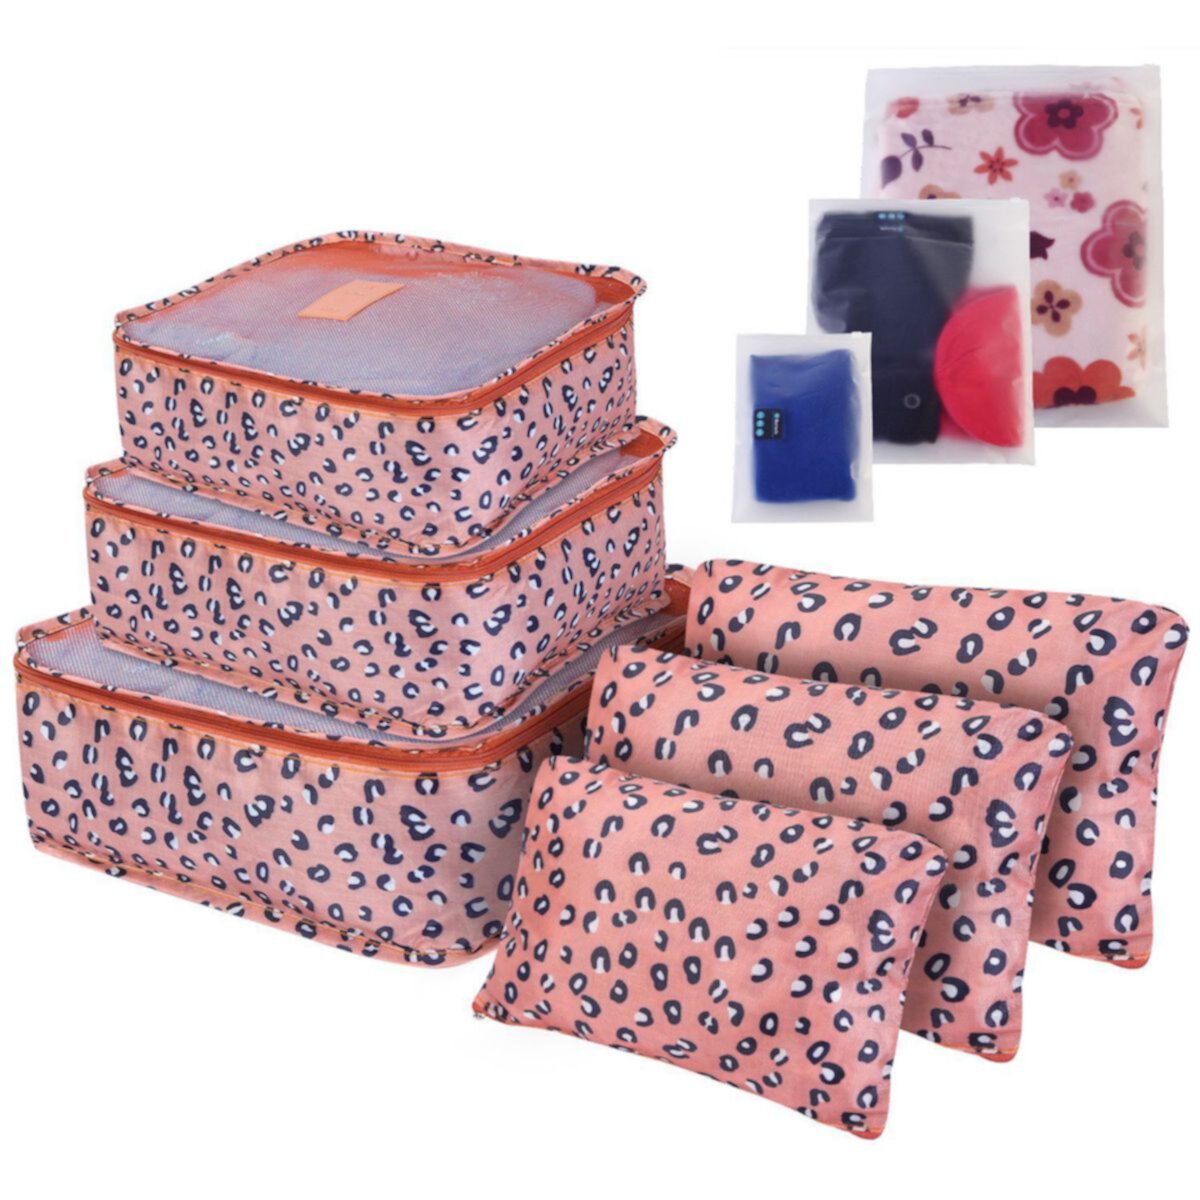 Water-resistant Clothes Storage Bags Travel Luggage Organizer Set Of 9 Eggracks By Global Phoenix